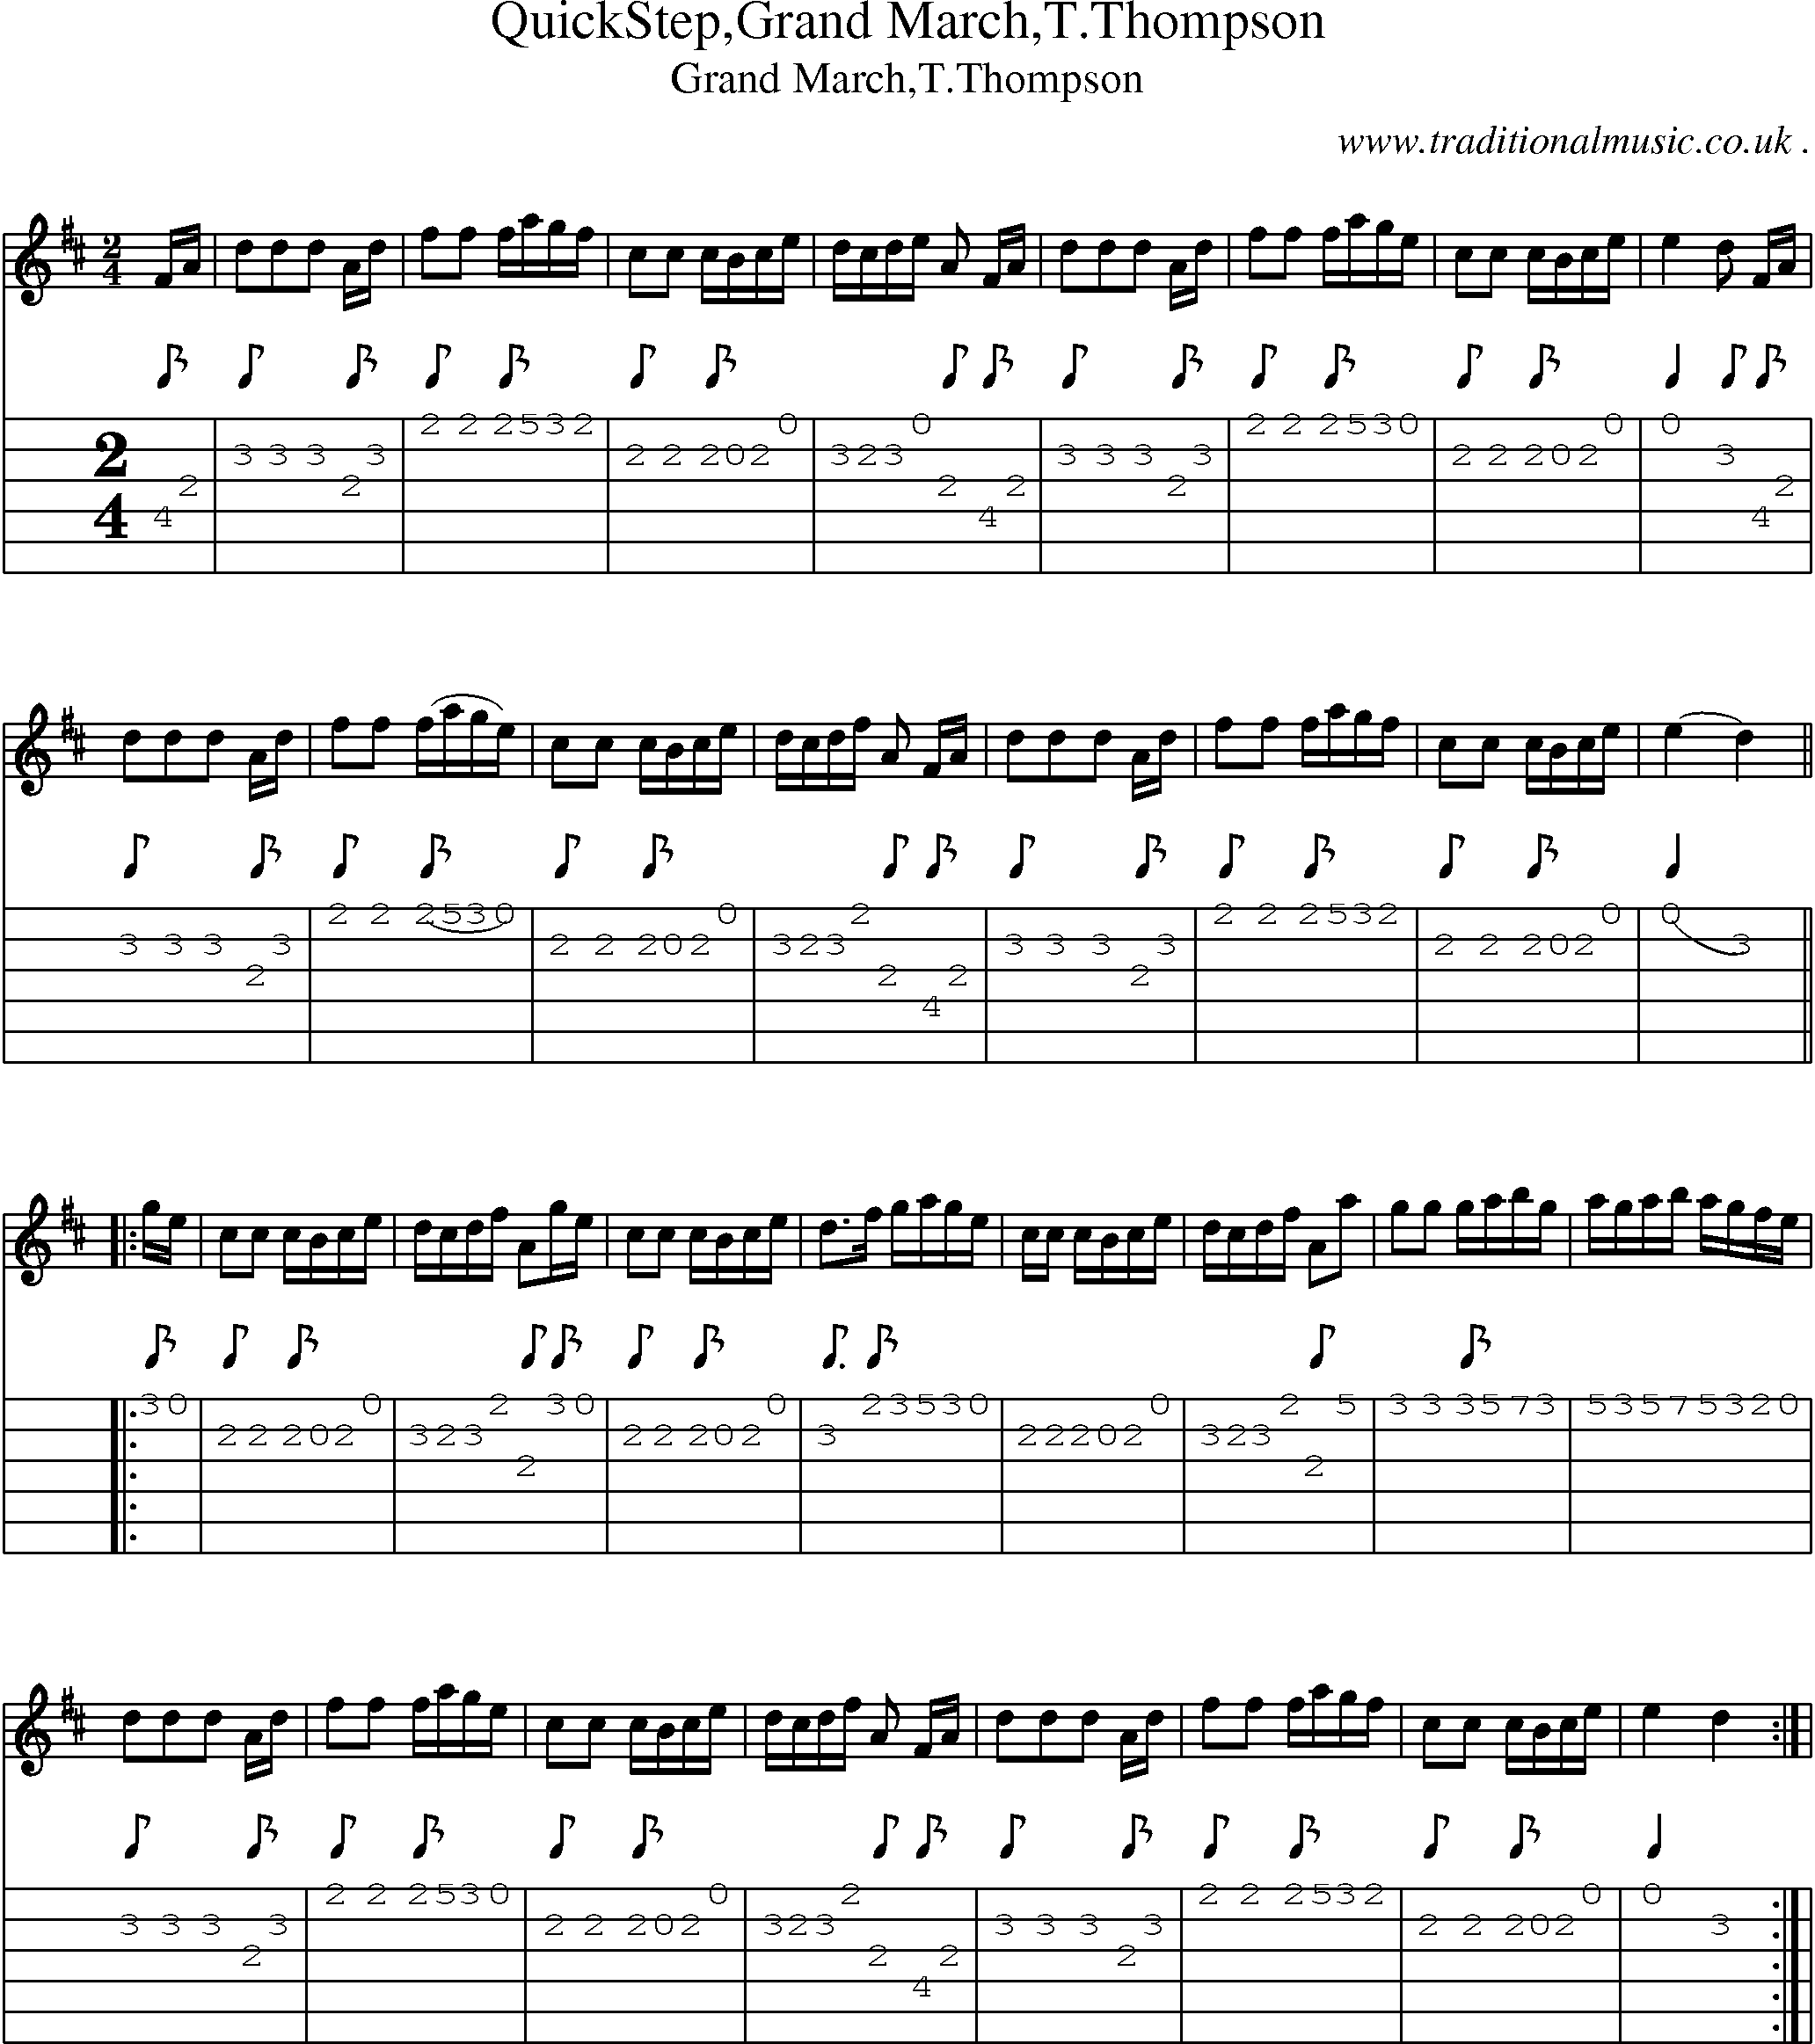 Sheet-Music and Guitar Tabs for Quickstepgrand Marchtthompson